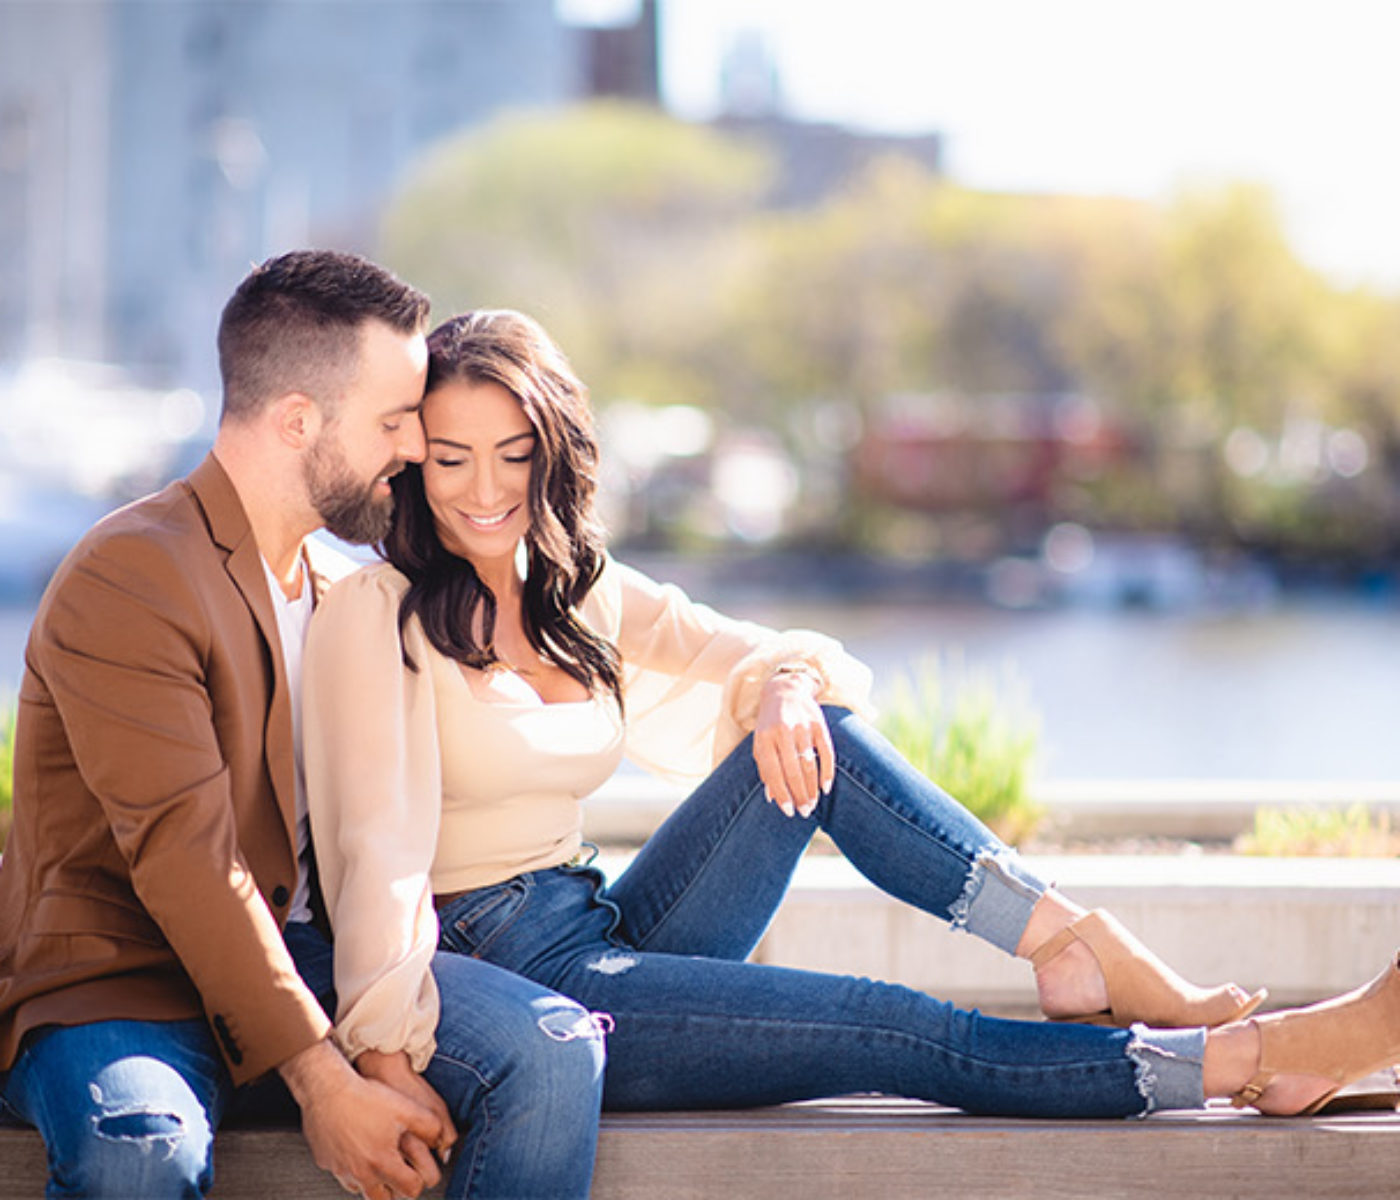 Engagement Photography Guide